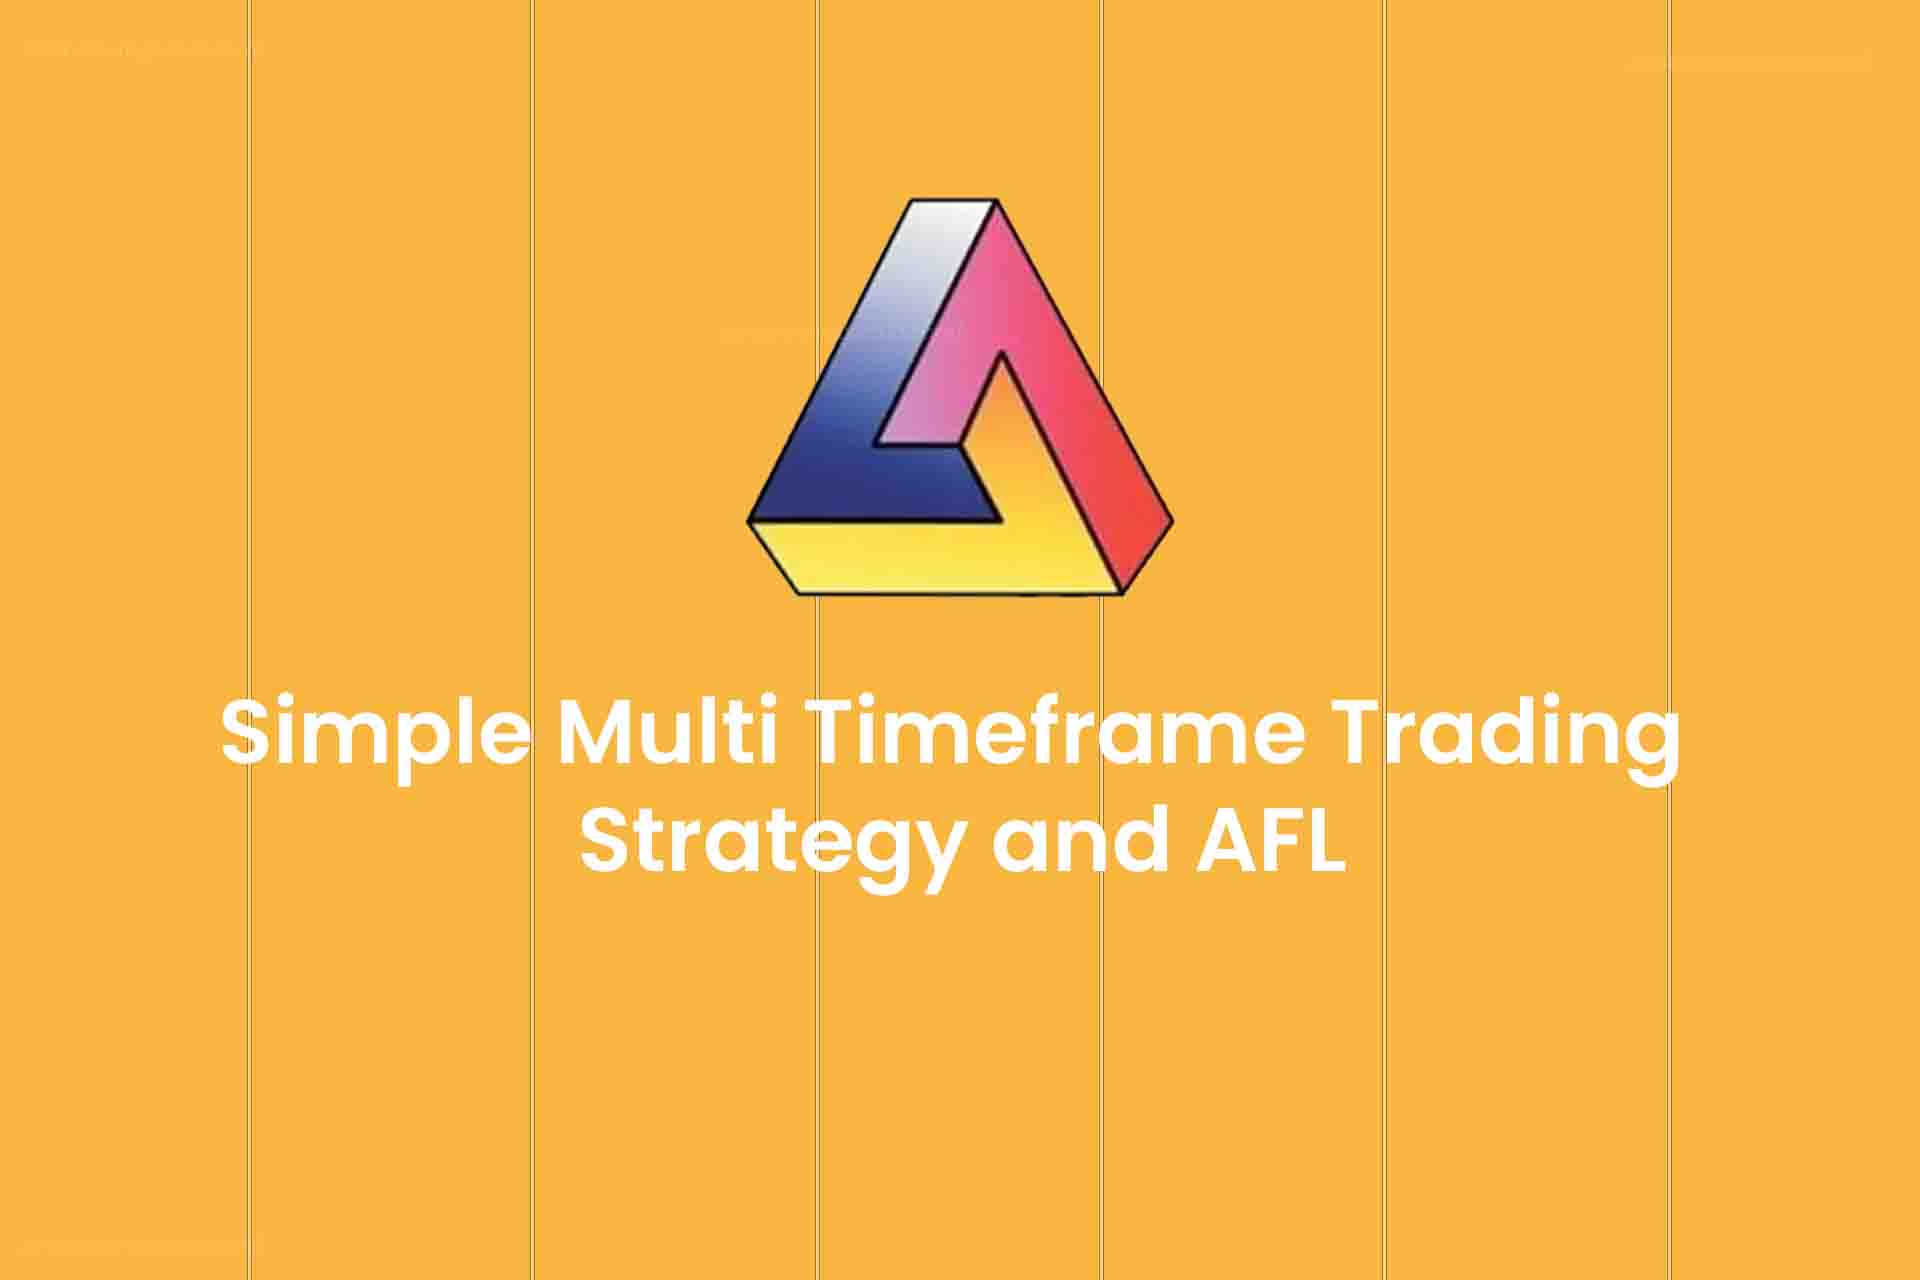 Simple Multi Timeframe Trading Strategy and AFL